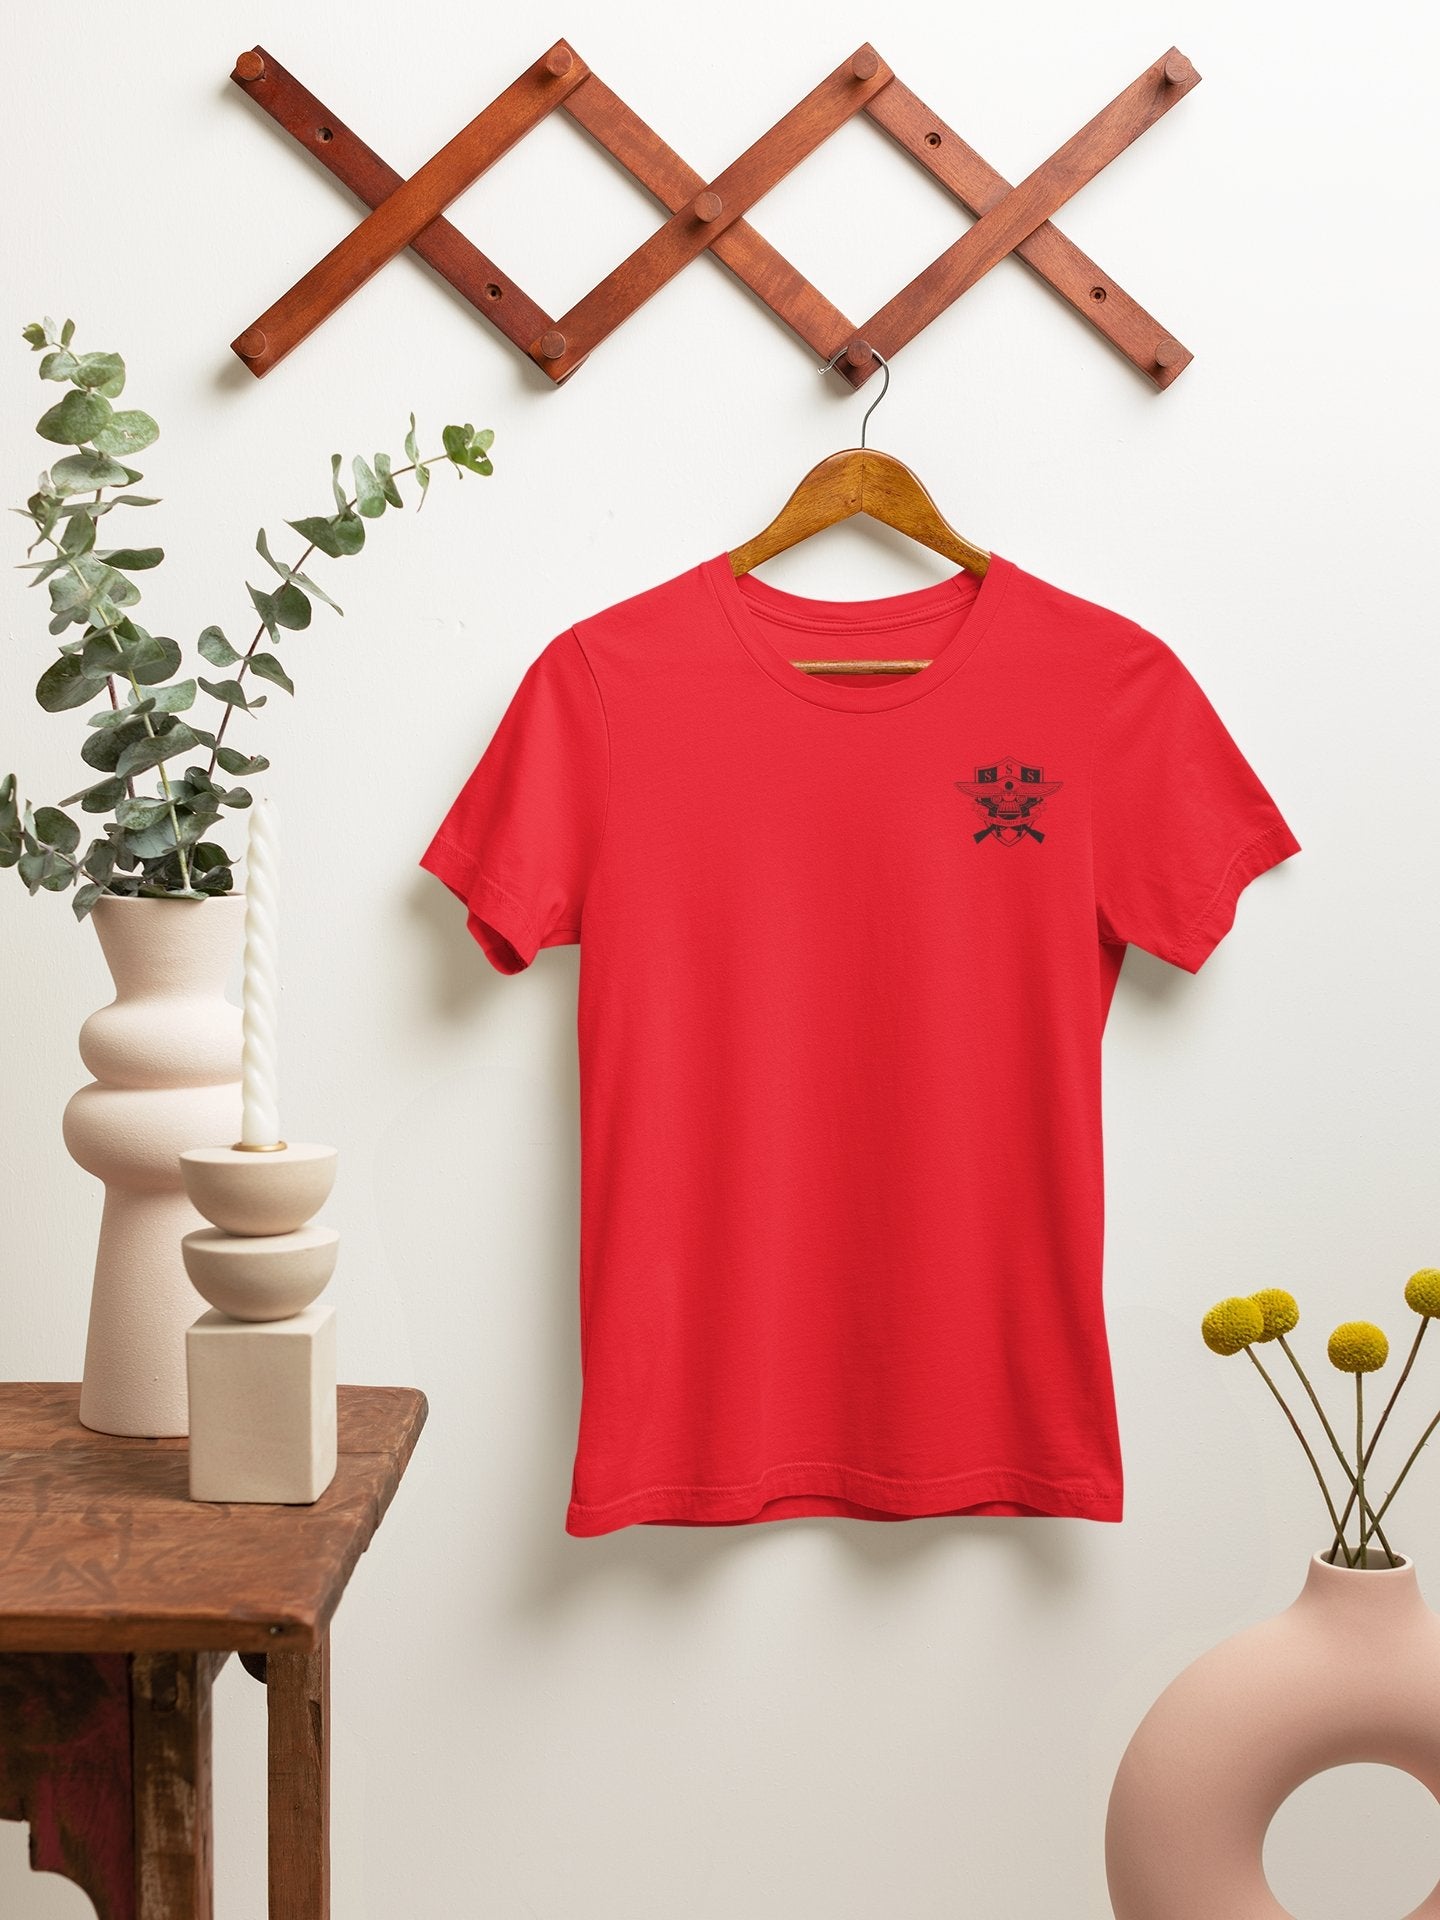 State Security Service Spy x Family Anime Shirt - One Punch Fits